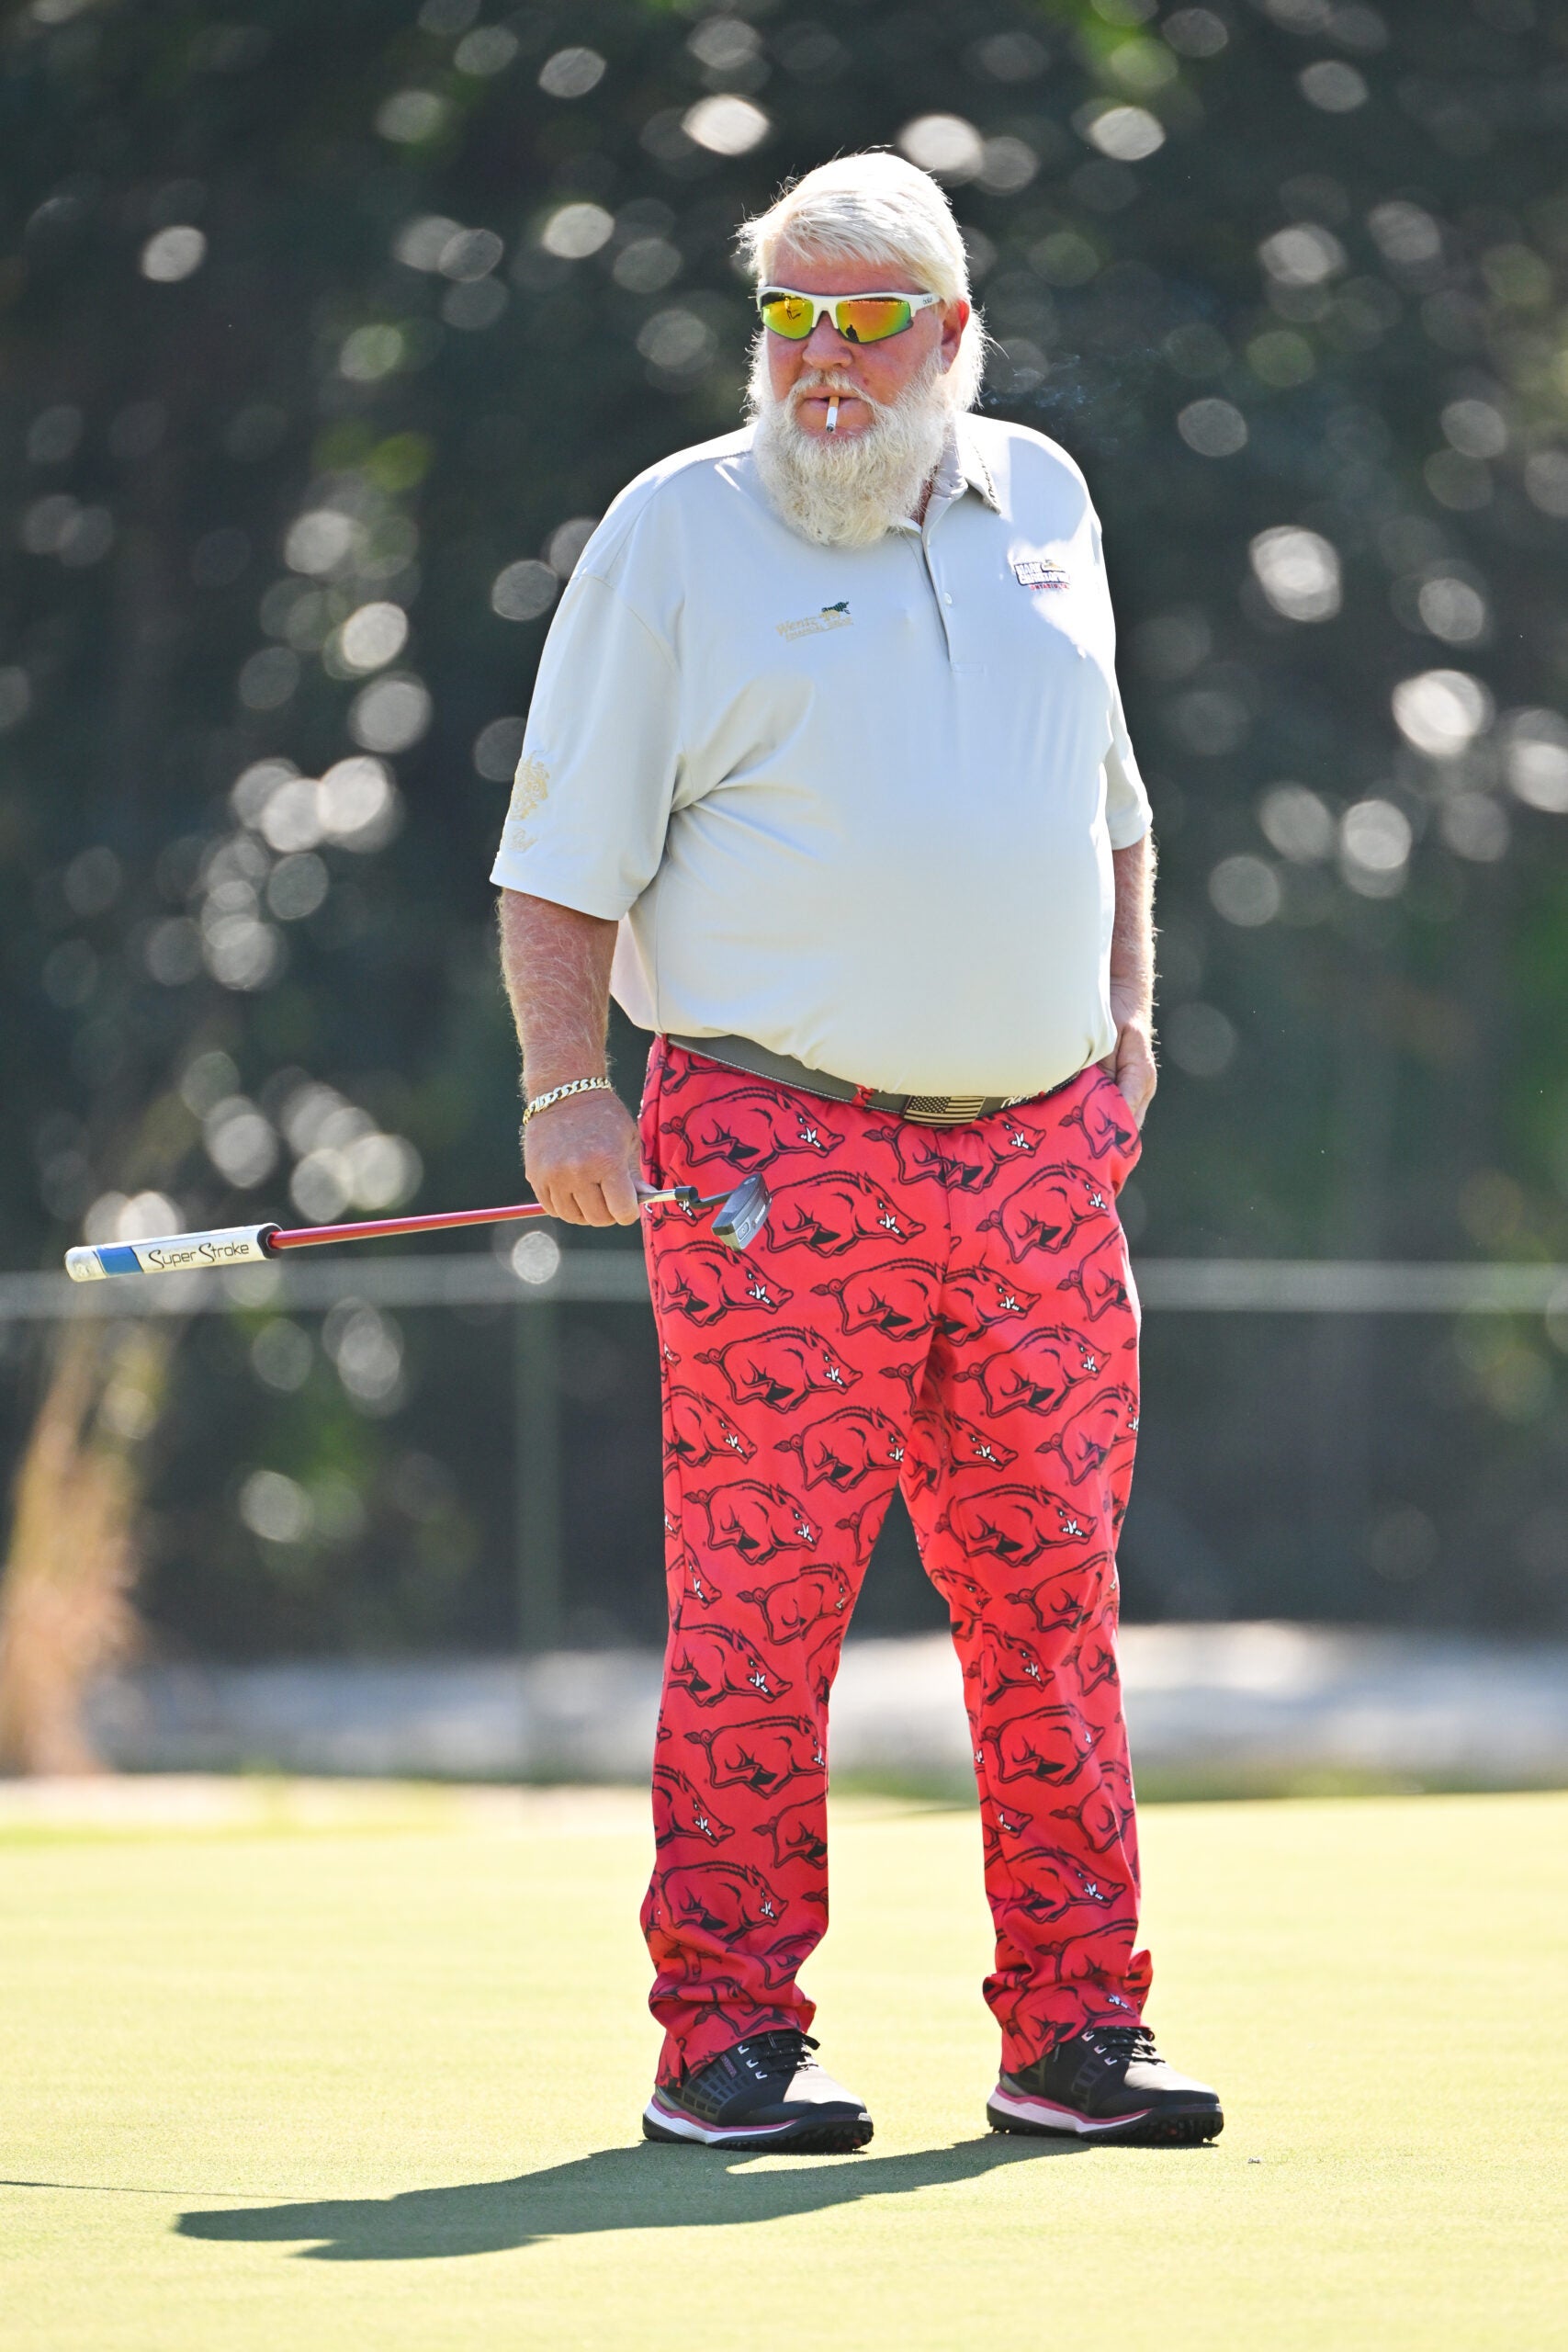 PONTE VEDRA BEACH, FLORIDA - OCTOBER 08: John Daly smokes a cigarette while playing the first green during the second round of the PGA TOUR Champions Constellation FURYK & FRIENDS presented by Circle K at Timuquana Country Club on October 8, 2022 in Jacksonville, Florida. (Photo by Ben Jared/PGA TOUR via Getty Images)